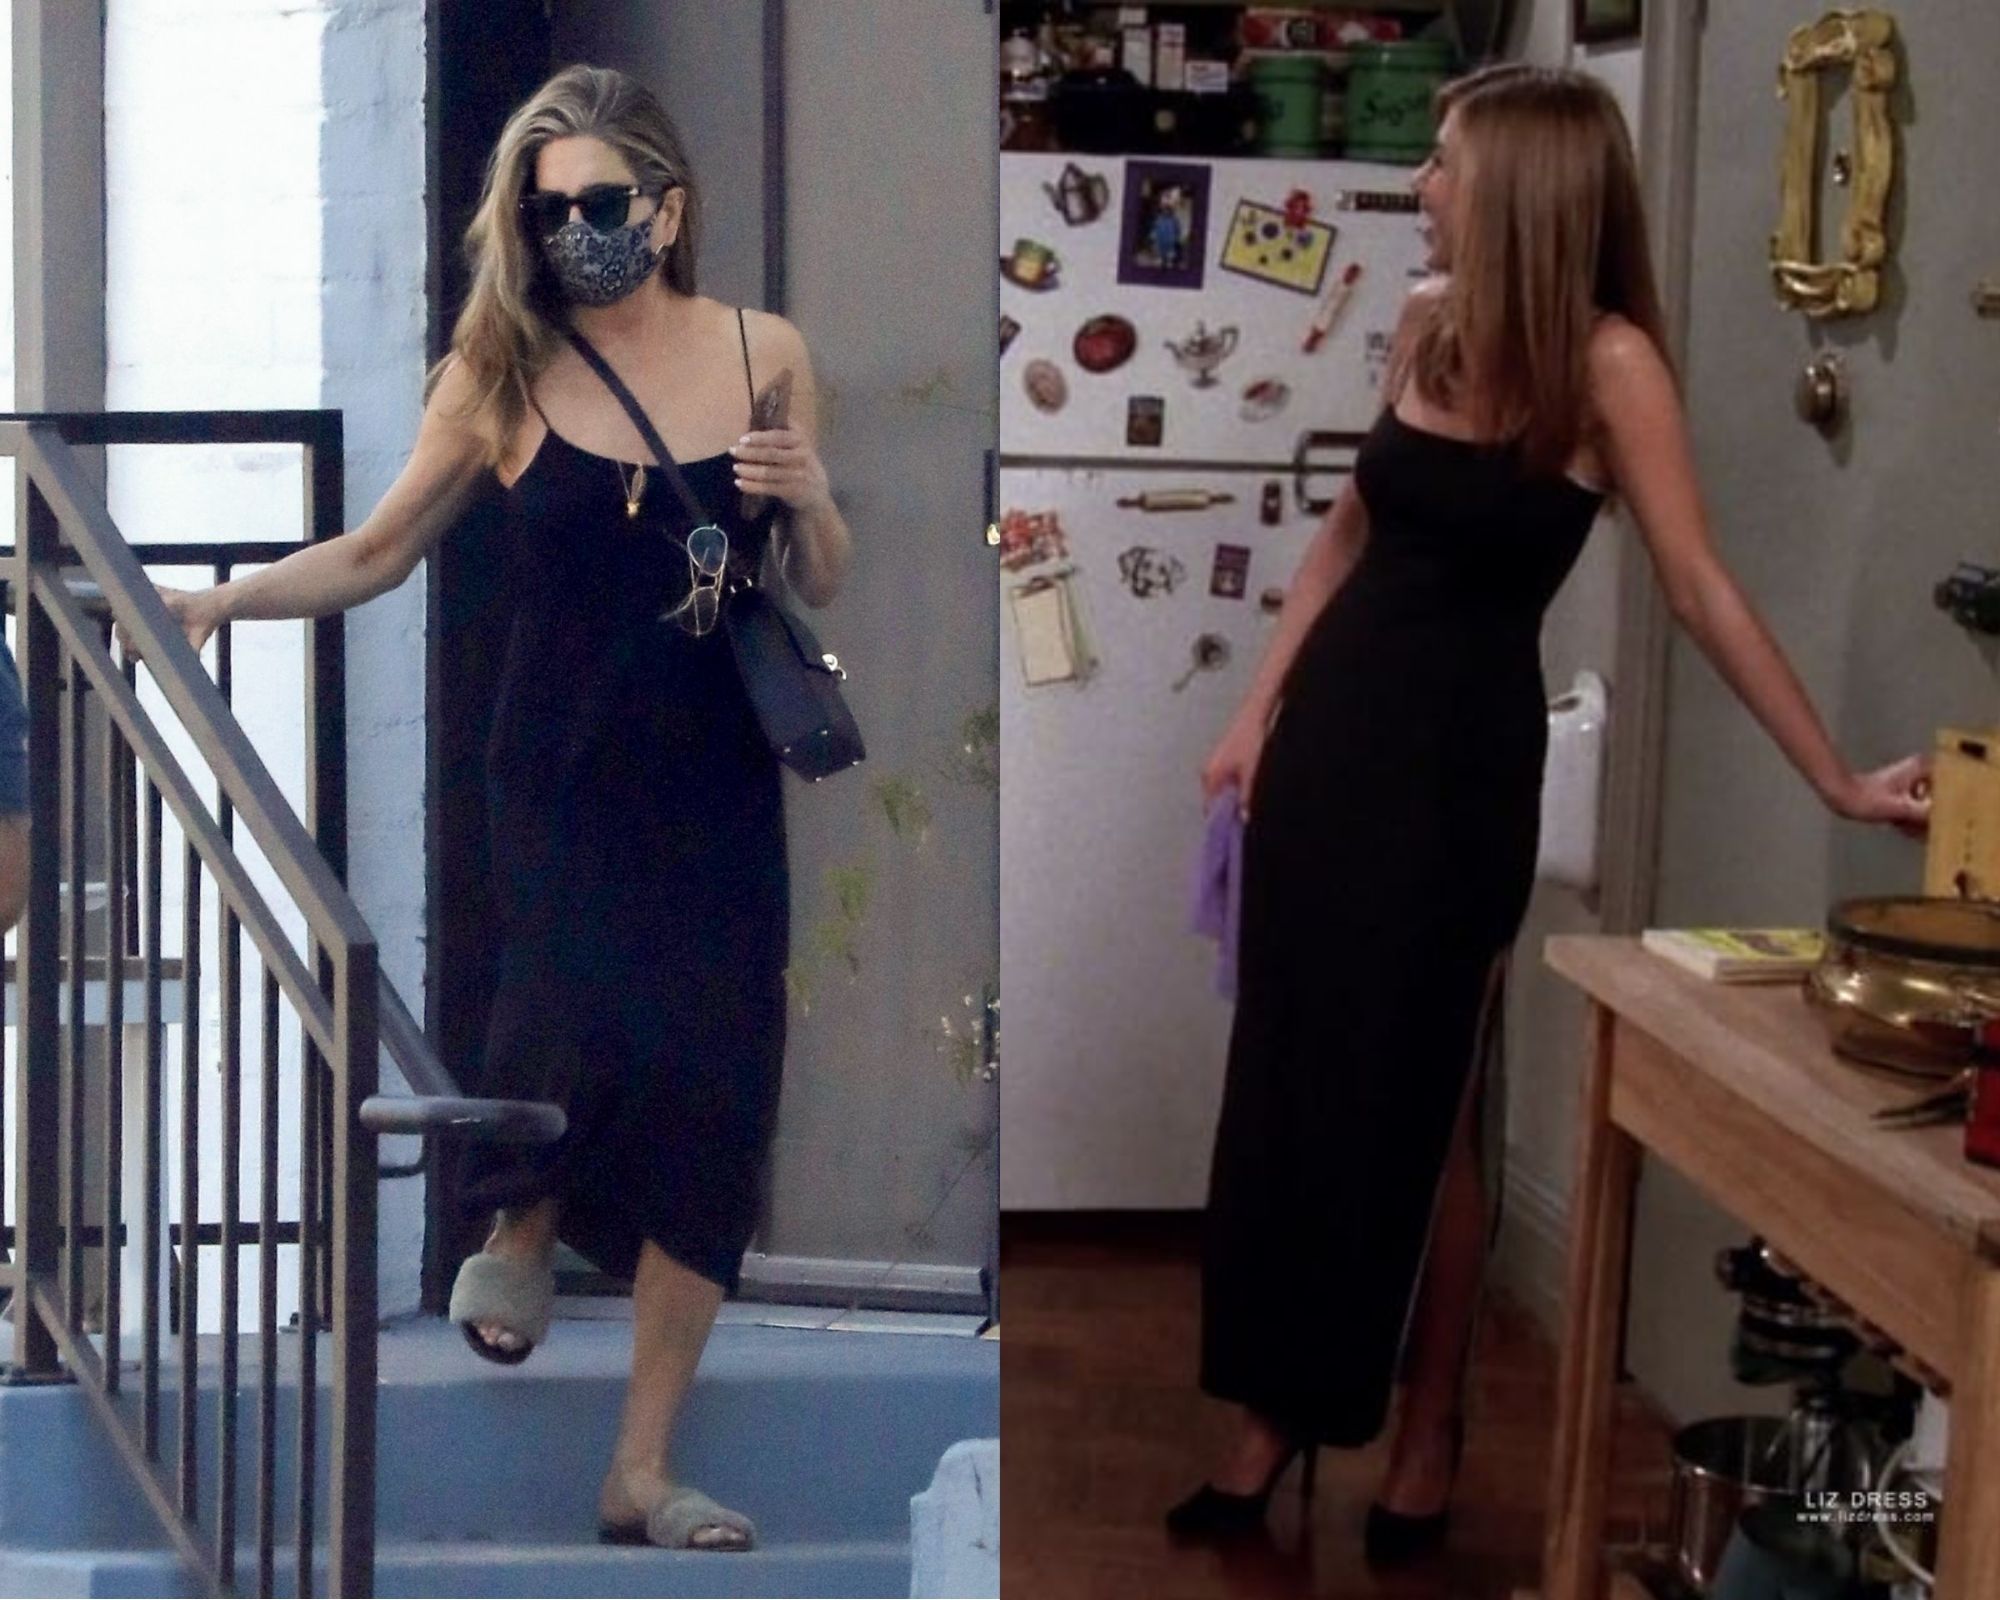 Jennifer Aniston dressed up in her iconic Rachel Green outfit - Masala